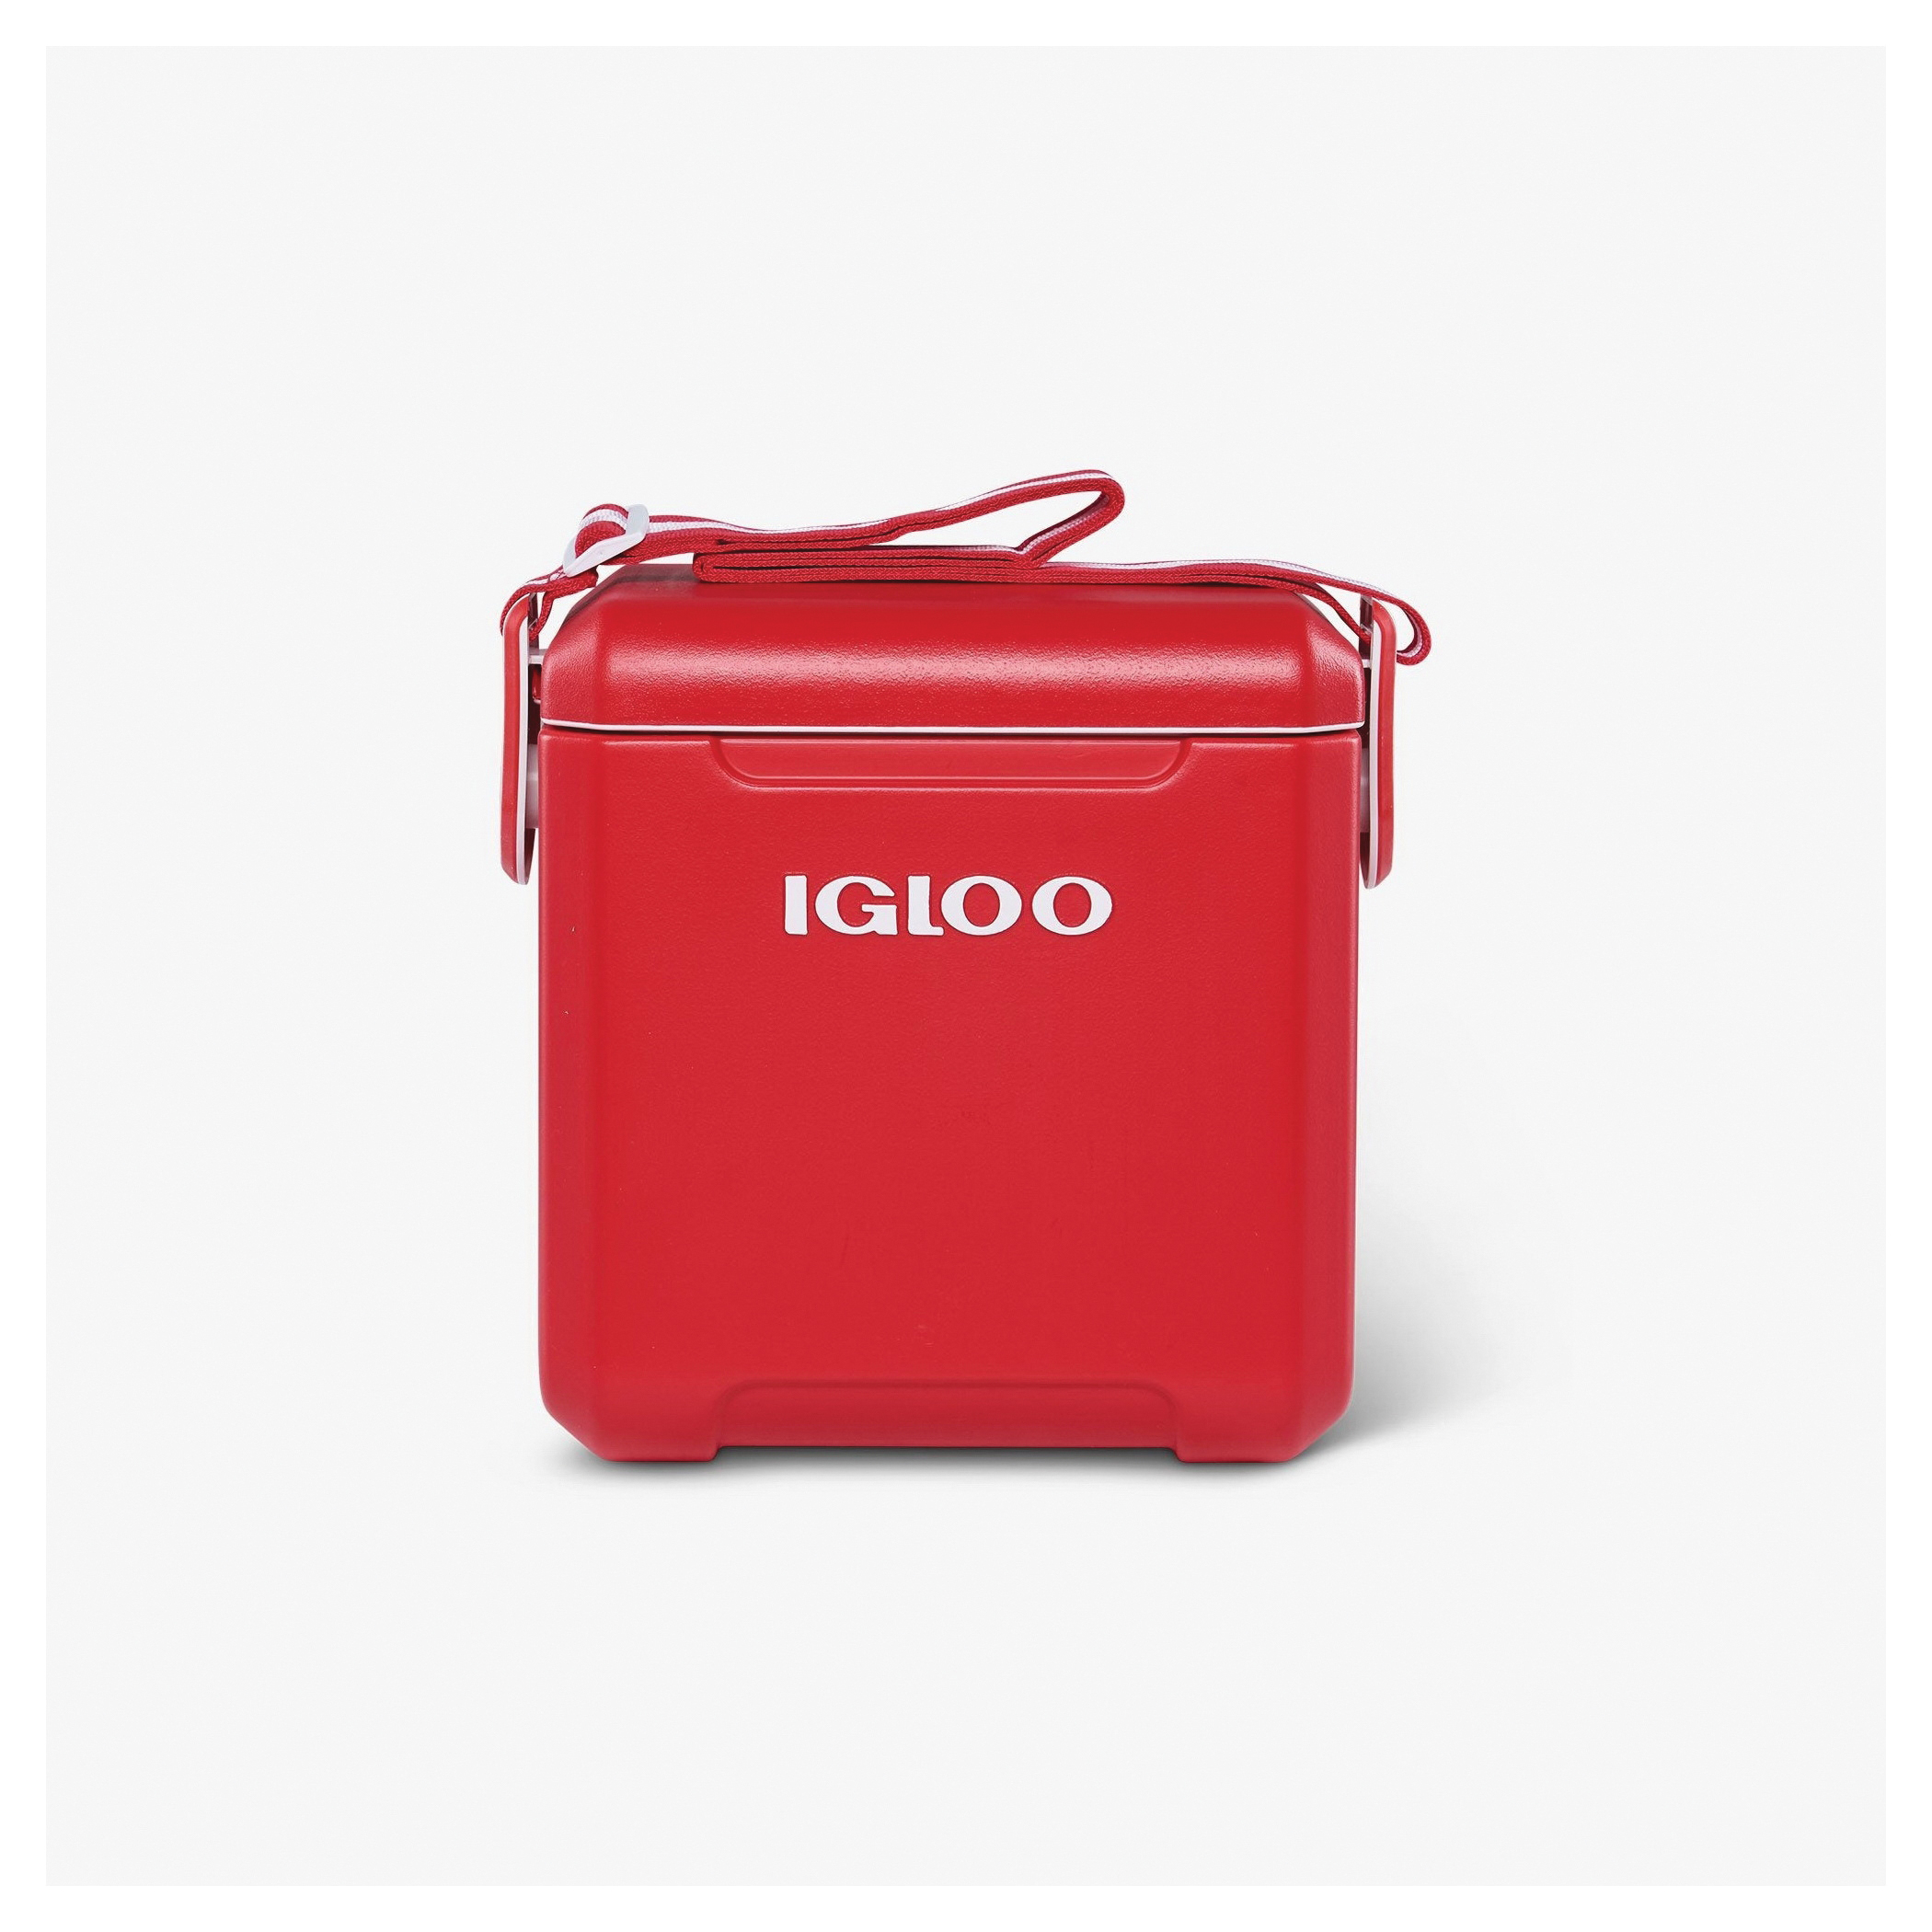 IGLOO Tag Along Too Cooler, 14 Can Cooler, Plastic, Racer days Ice Retention Racer Red